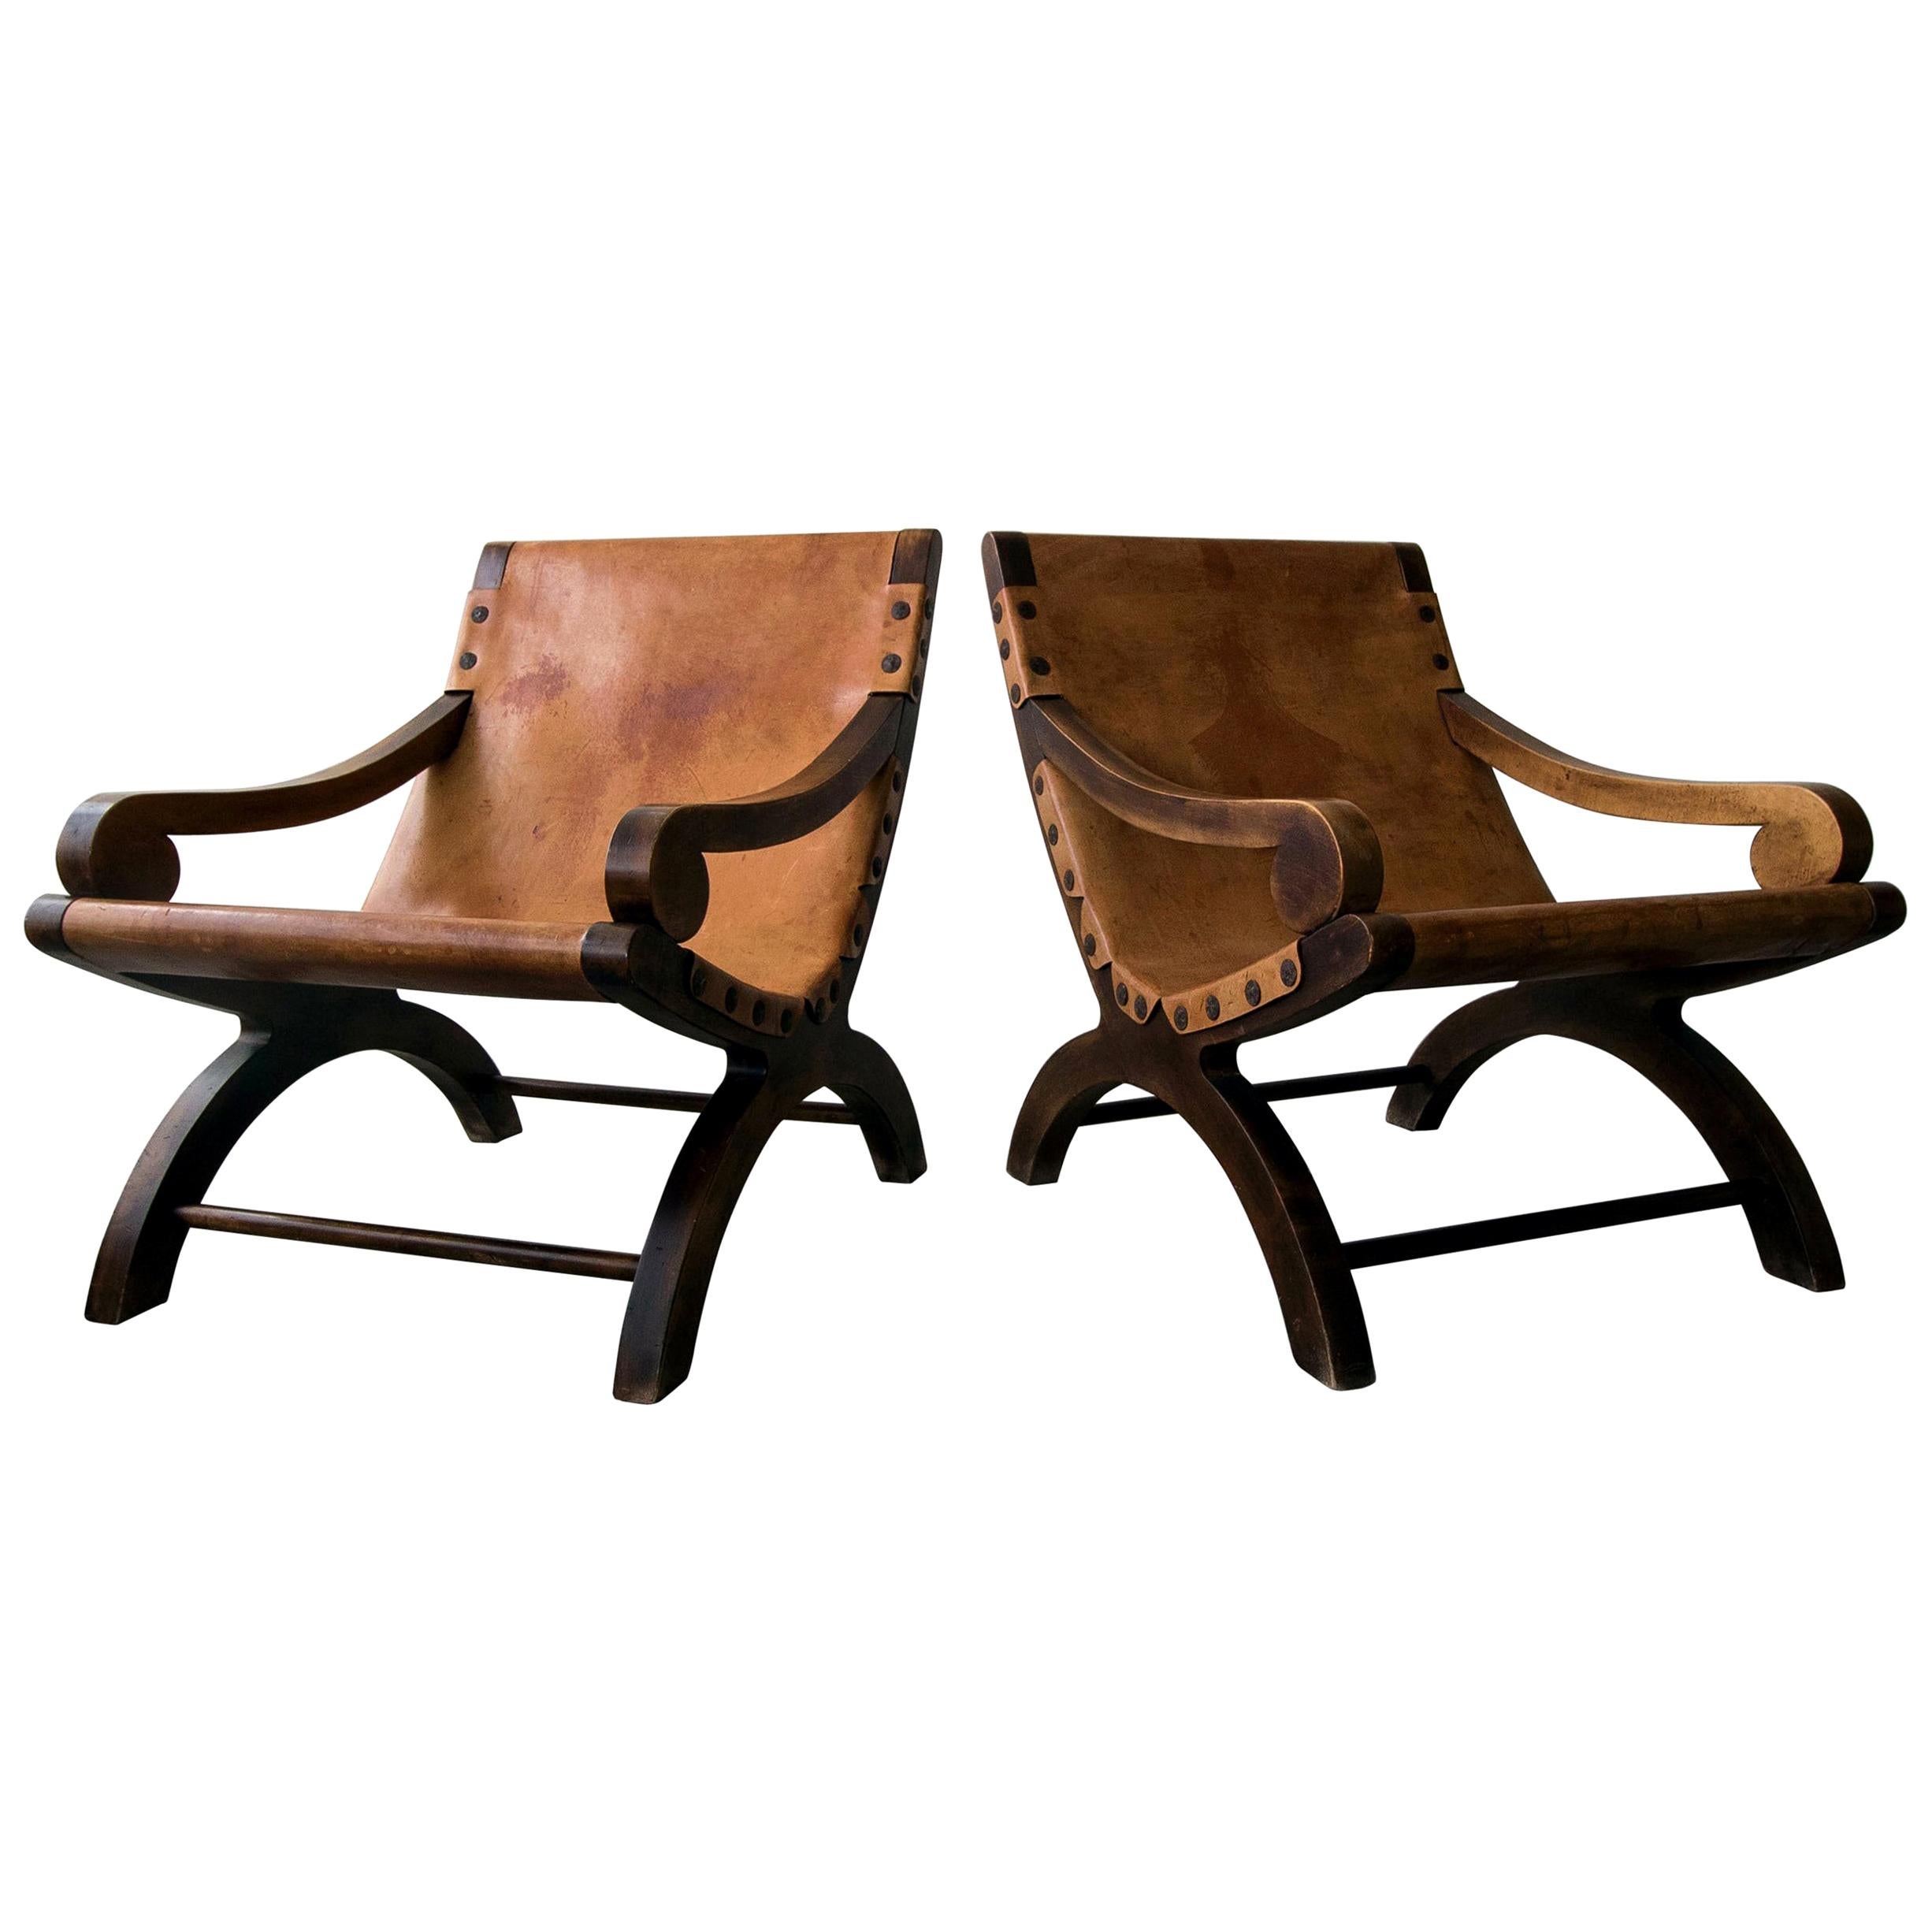 Pair of Vintage Butaque Leather Sling Lounge Chairs